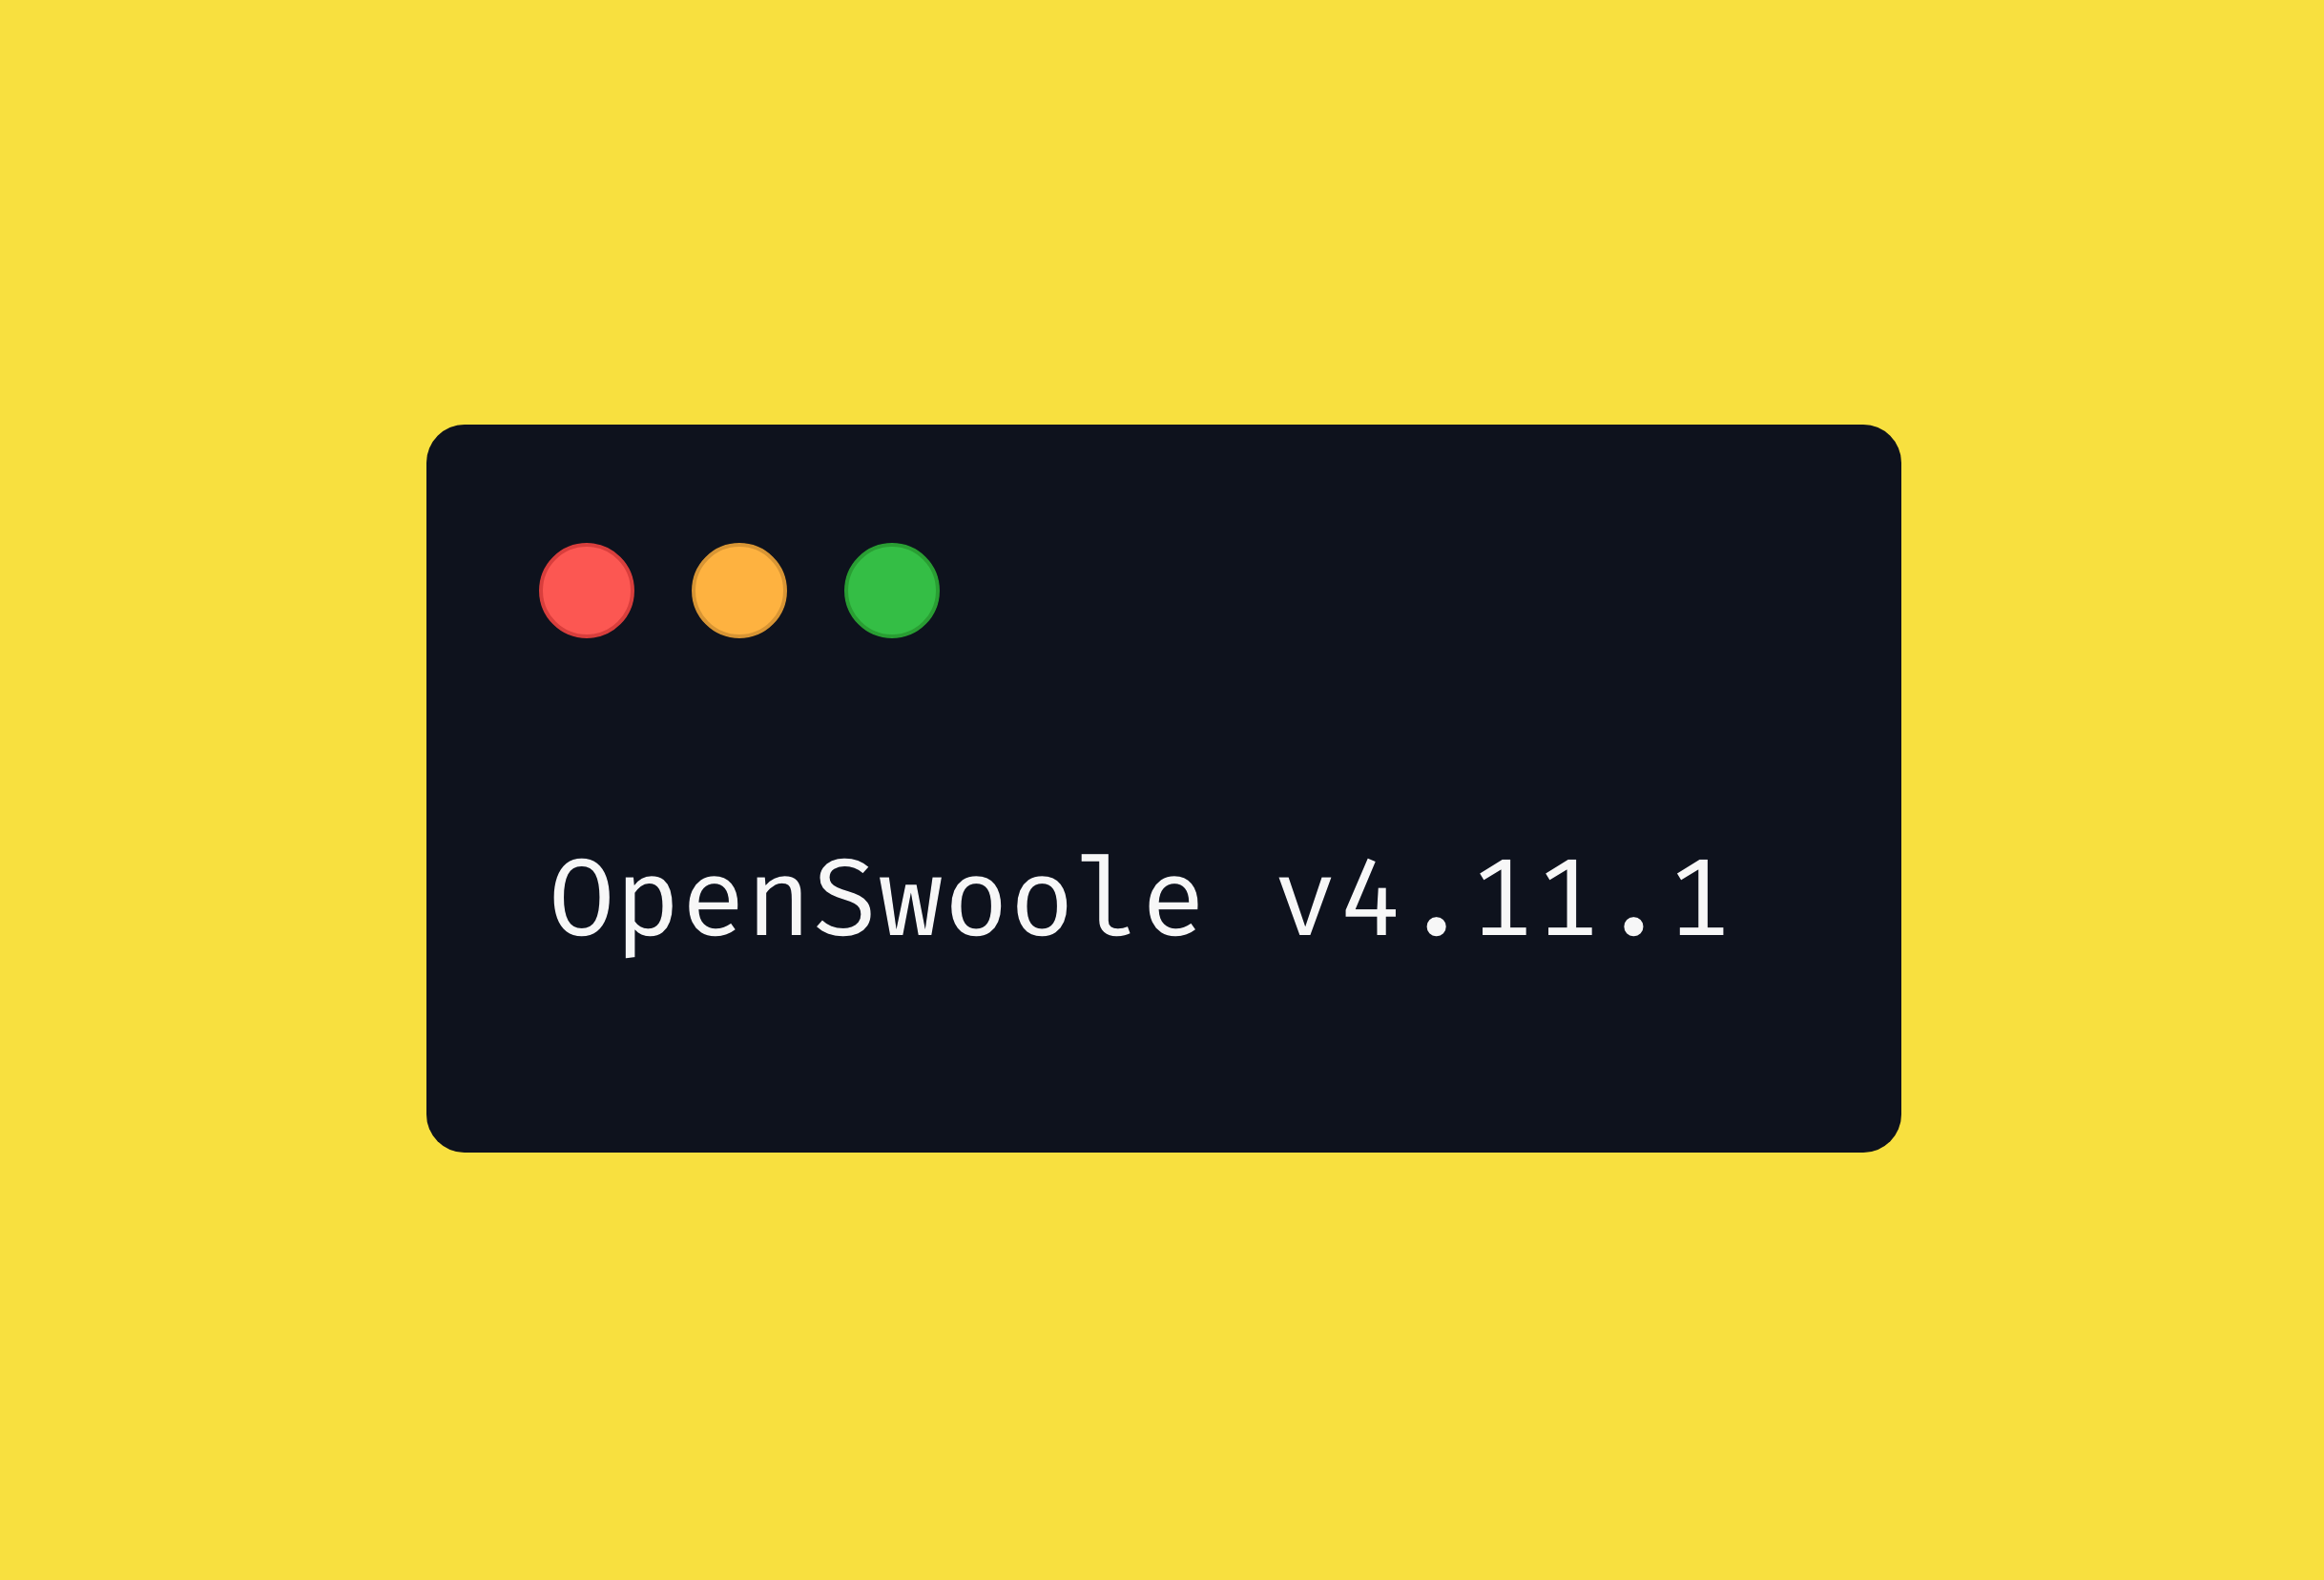 Open Swoole 4.11.1 released with multiple bug fixes